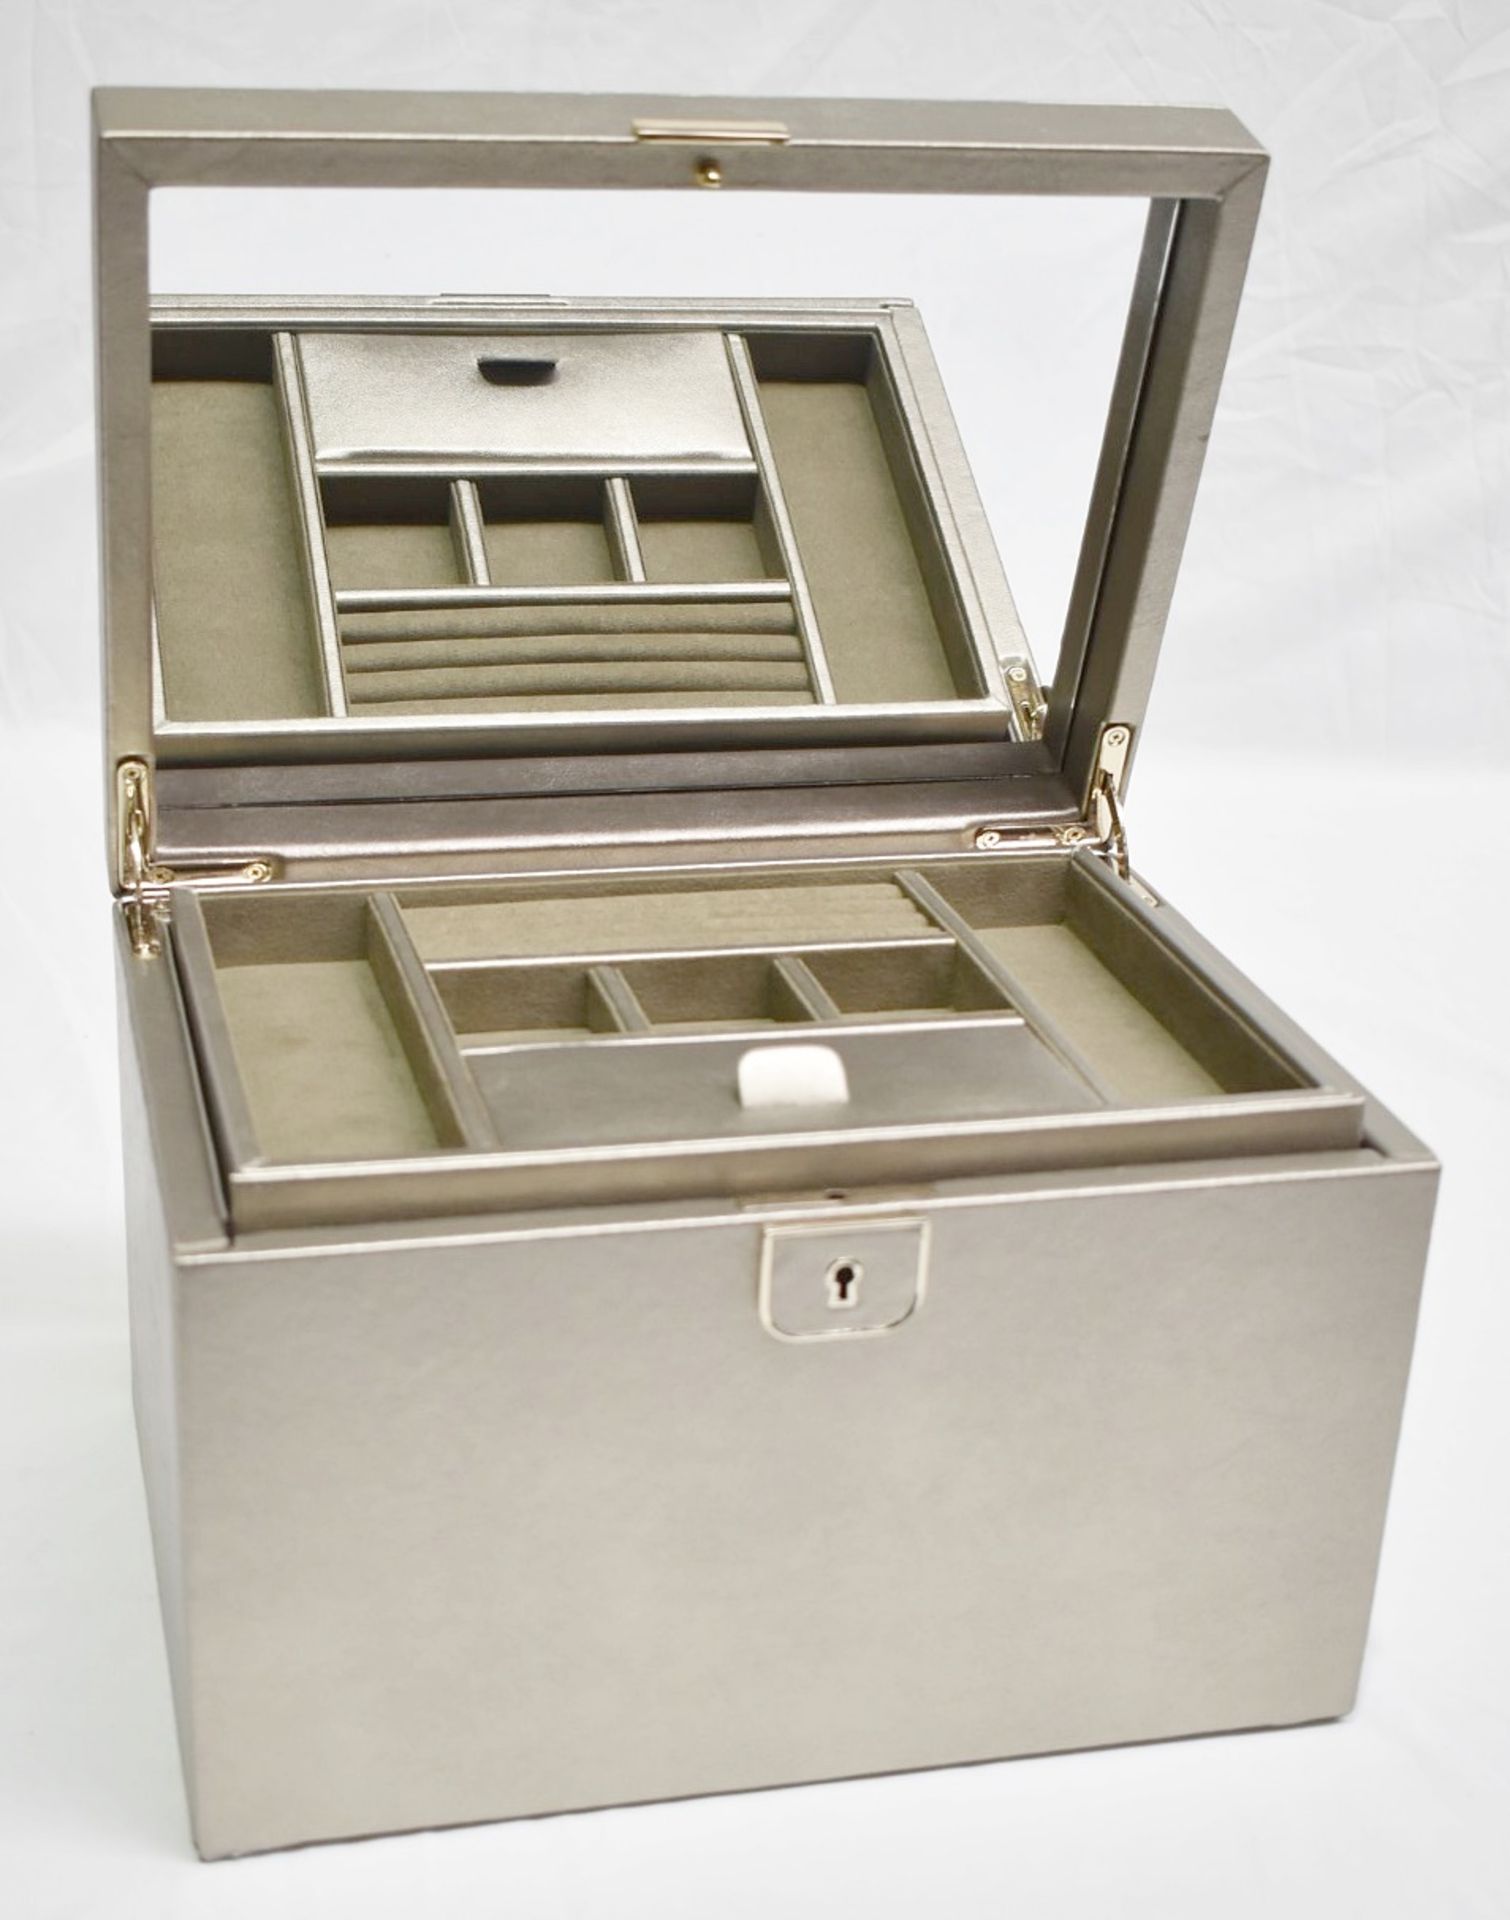 1 x WOLF 'Palermo' Large Luxury Leather Jewellery Box, With A Pewter Finish - Original Price £475.00 - Image 5 of 18